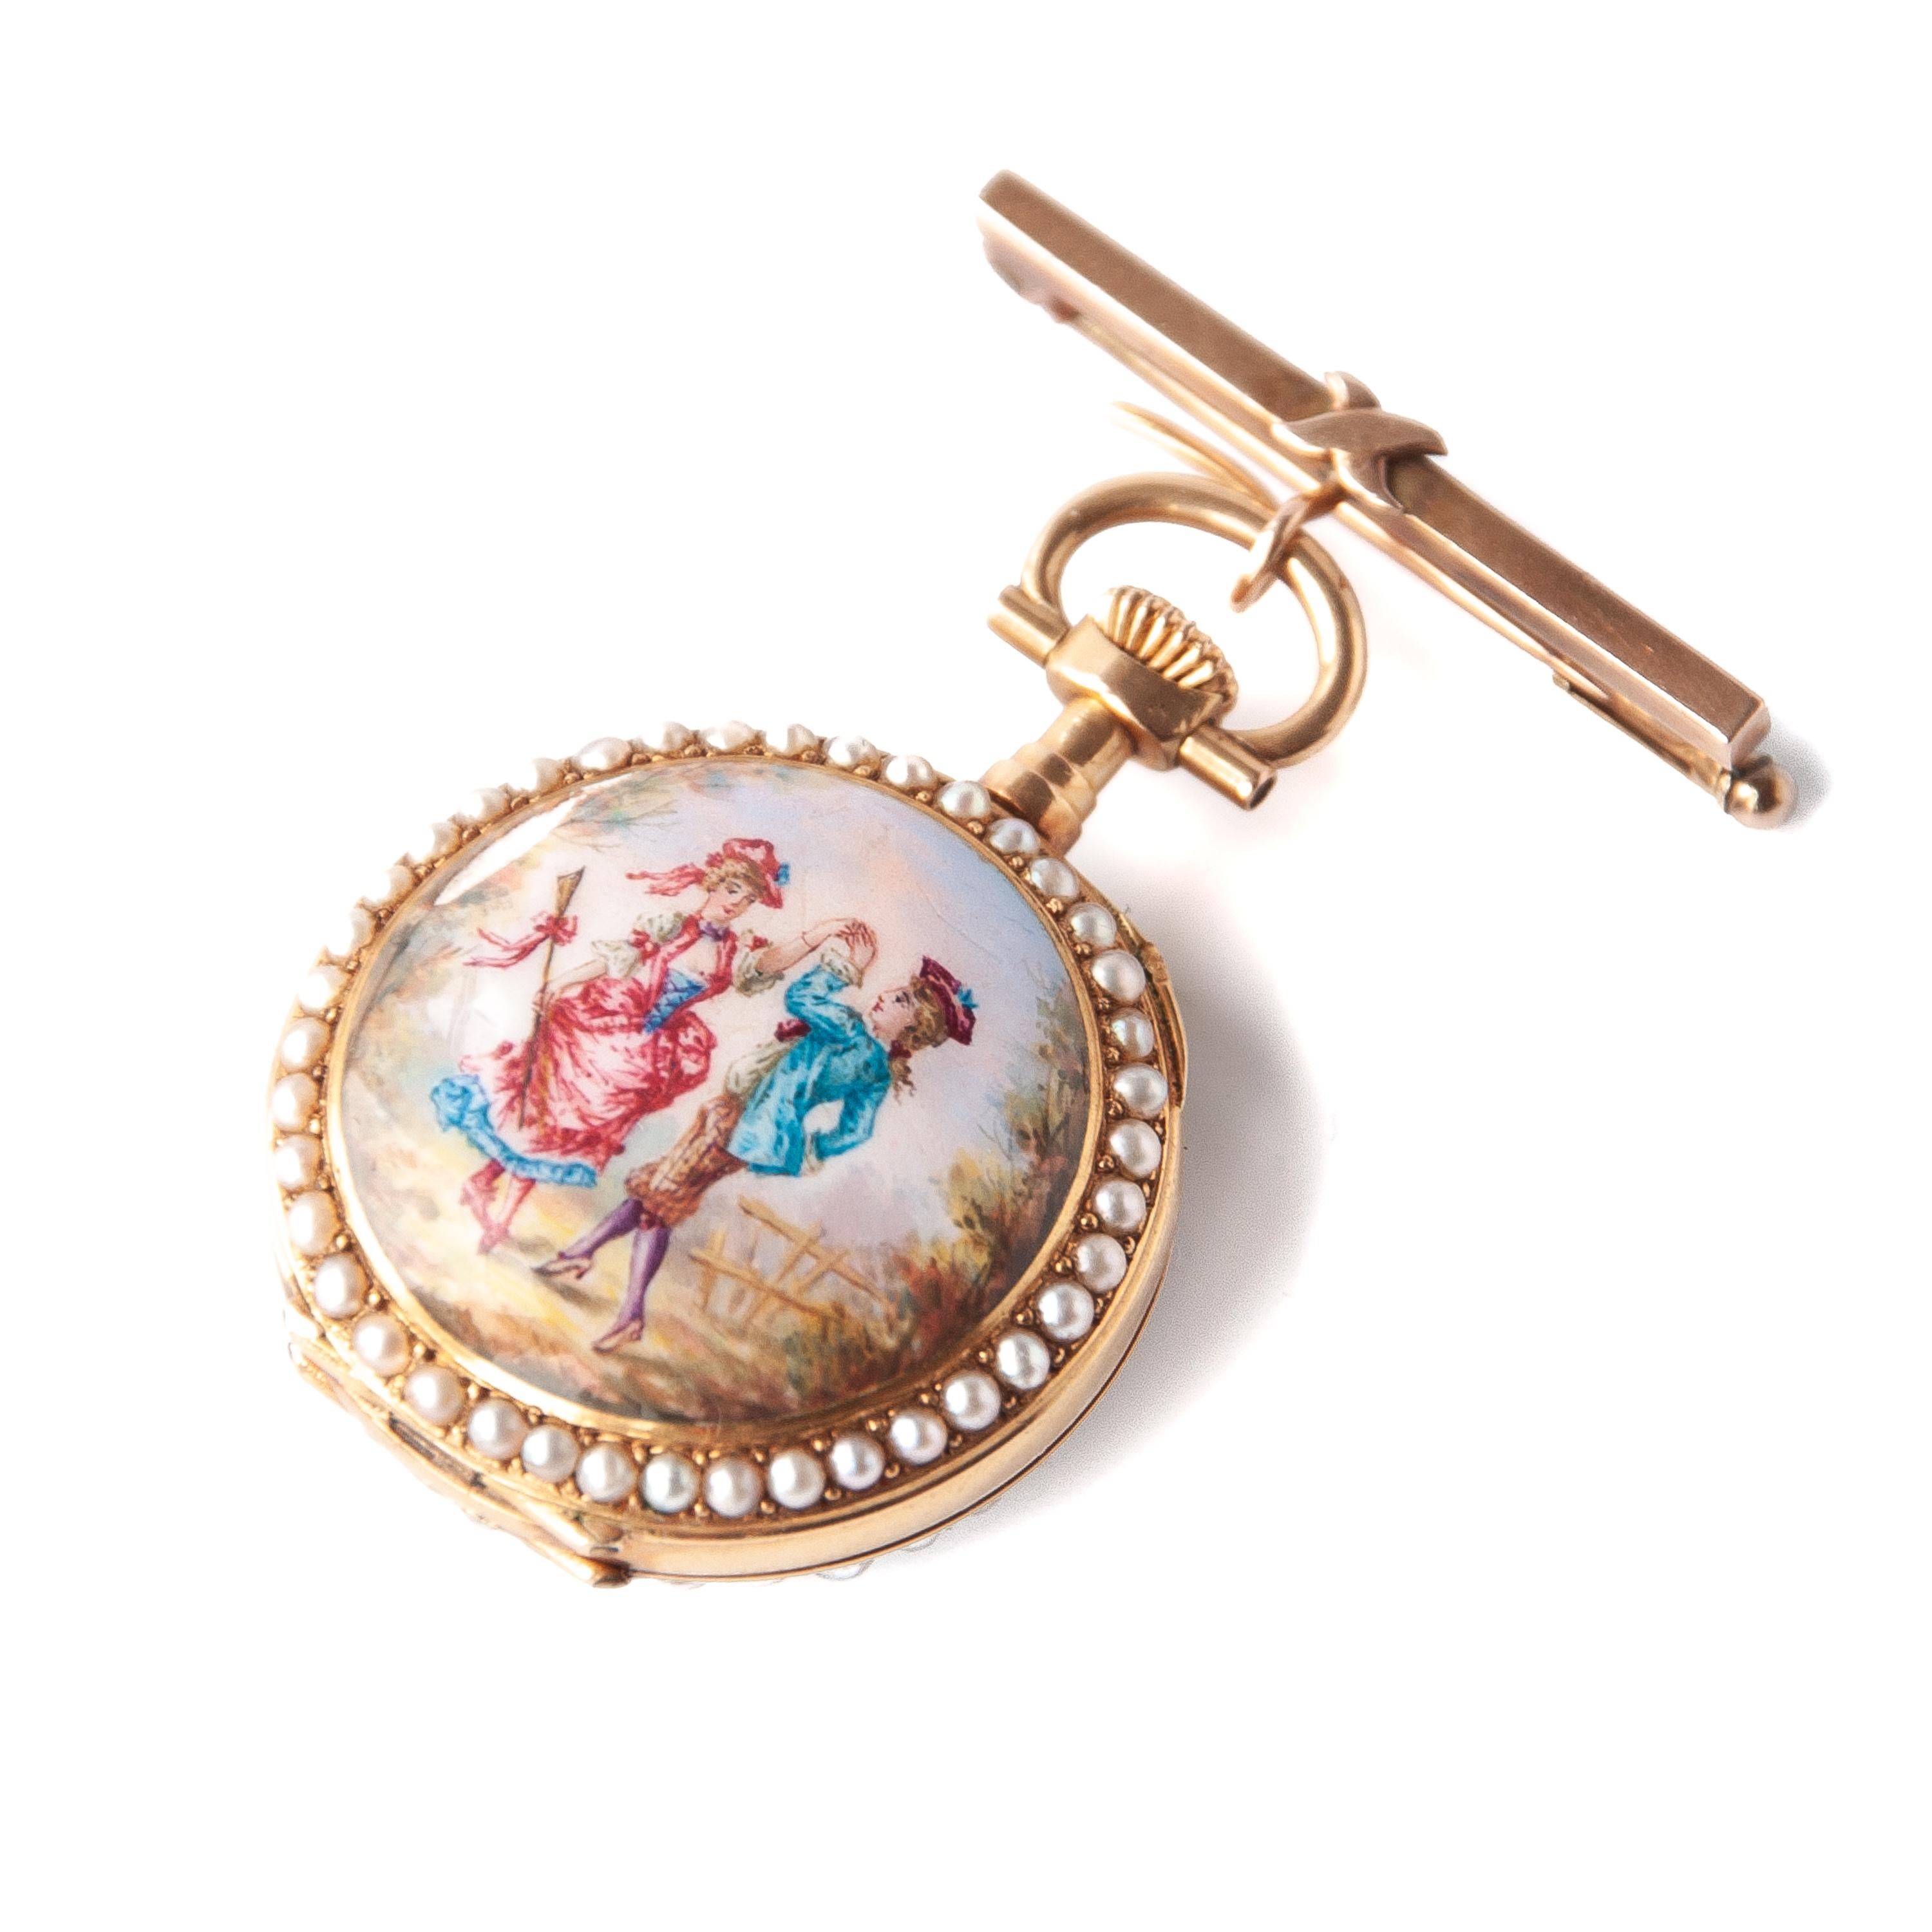 This nineteenth century 18 karat gold ladies pocket watch featuring a painted enamel scenery of a dancing couple. The watch is surrounded with seventy-seven seed pearls on both sides and can be worn as brooch. This elegant analogue ladies pocket